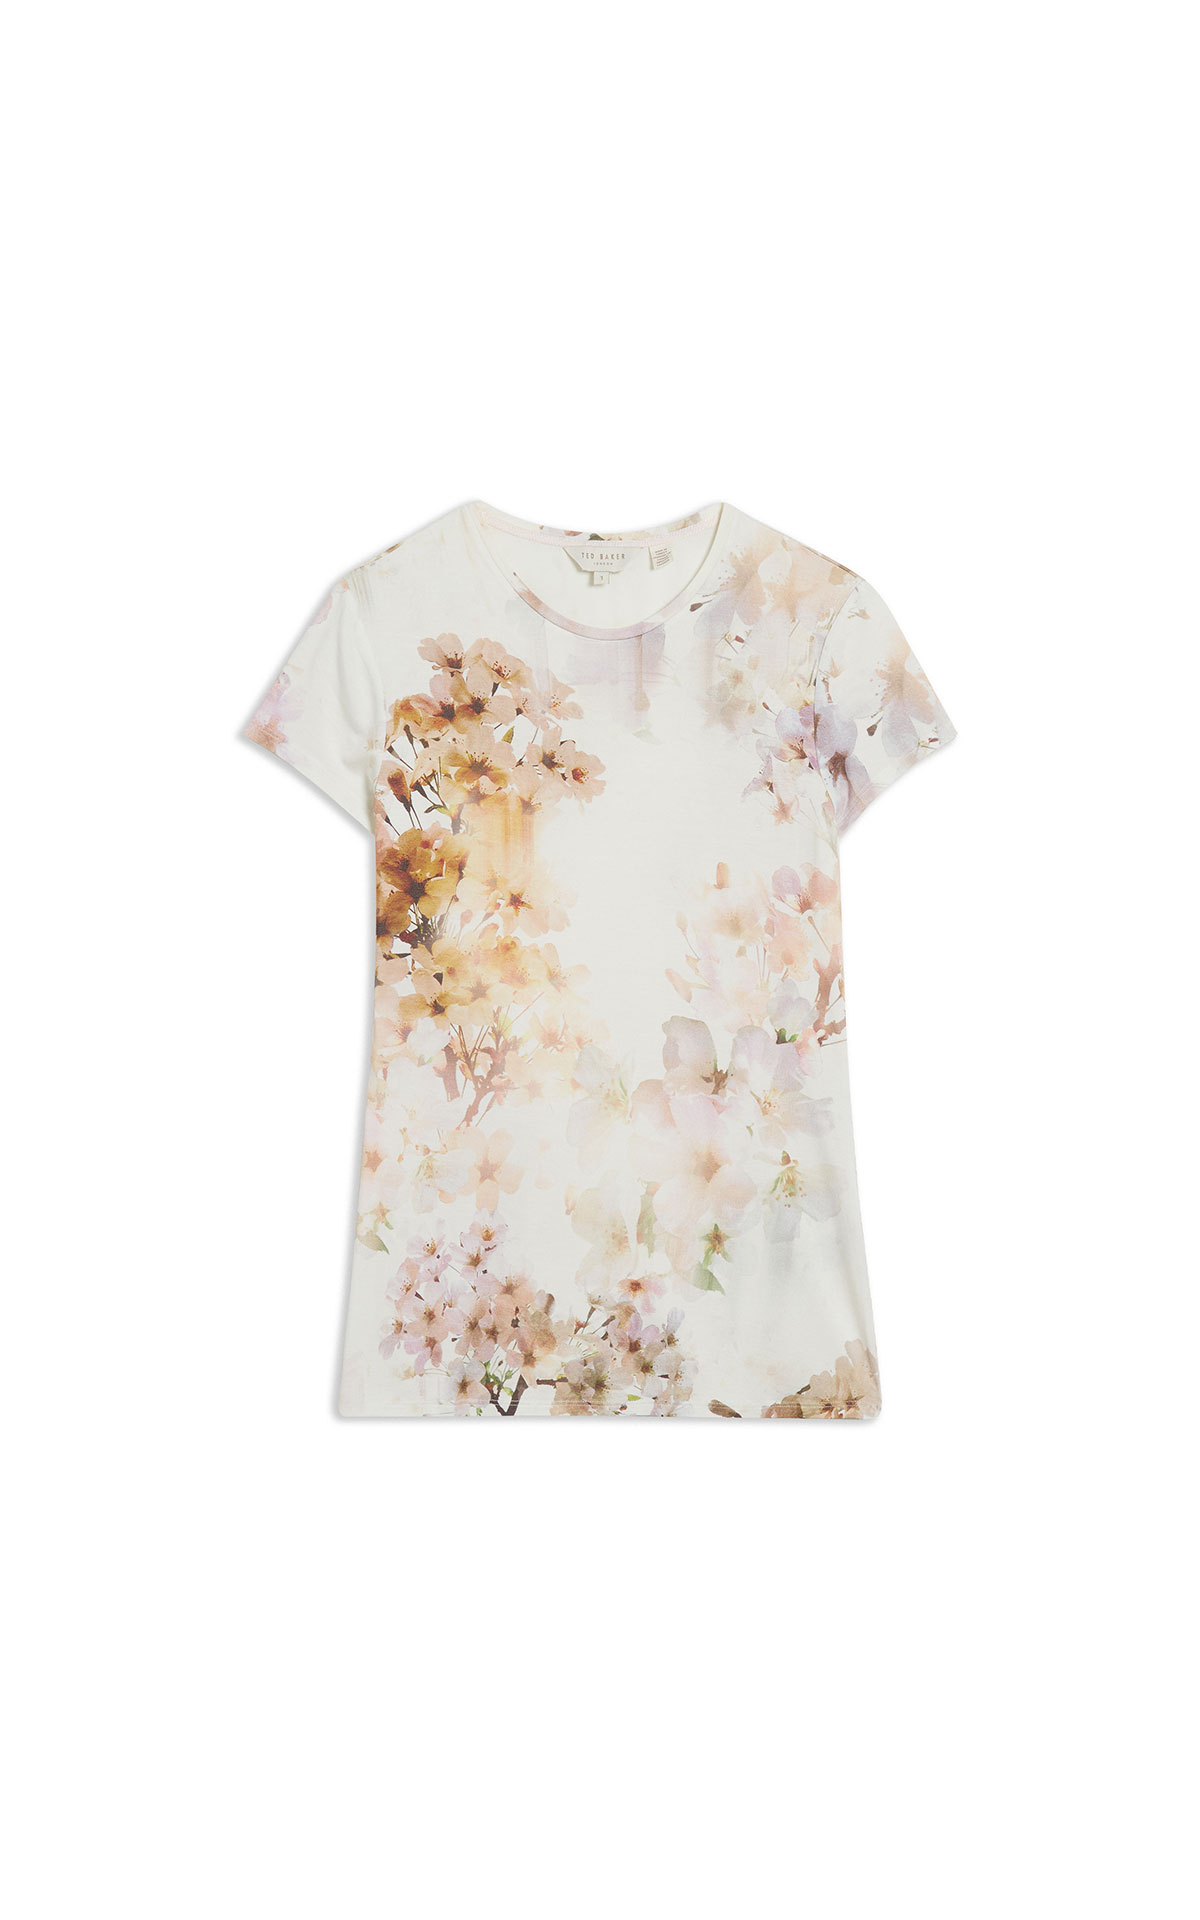 Ted Baker Vanilla fitted t-shirt from Bicester Village